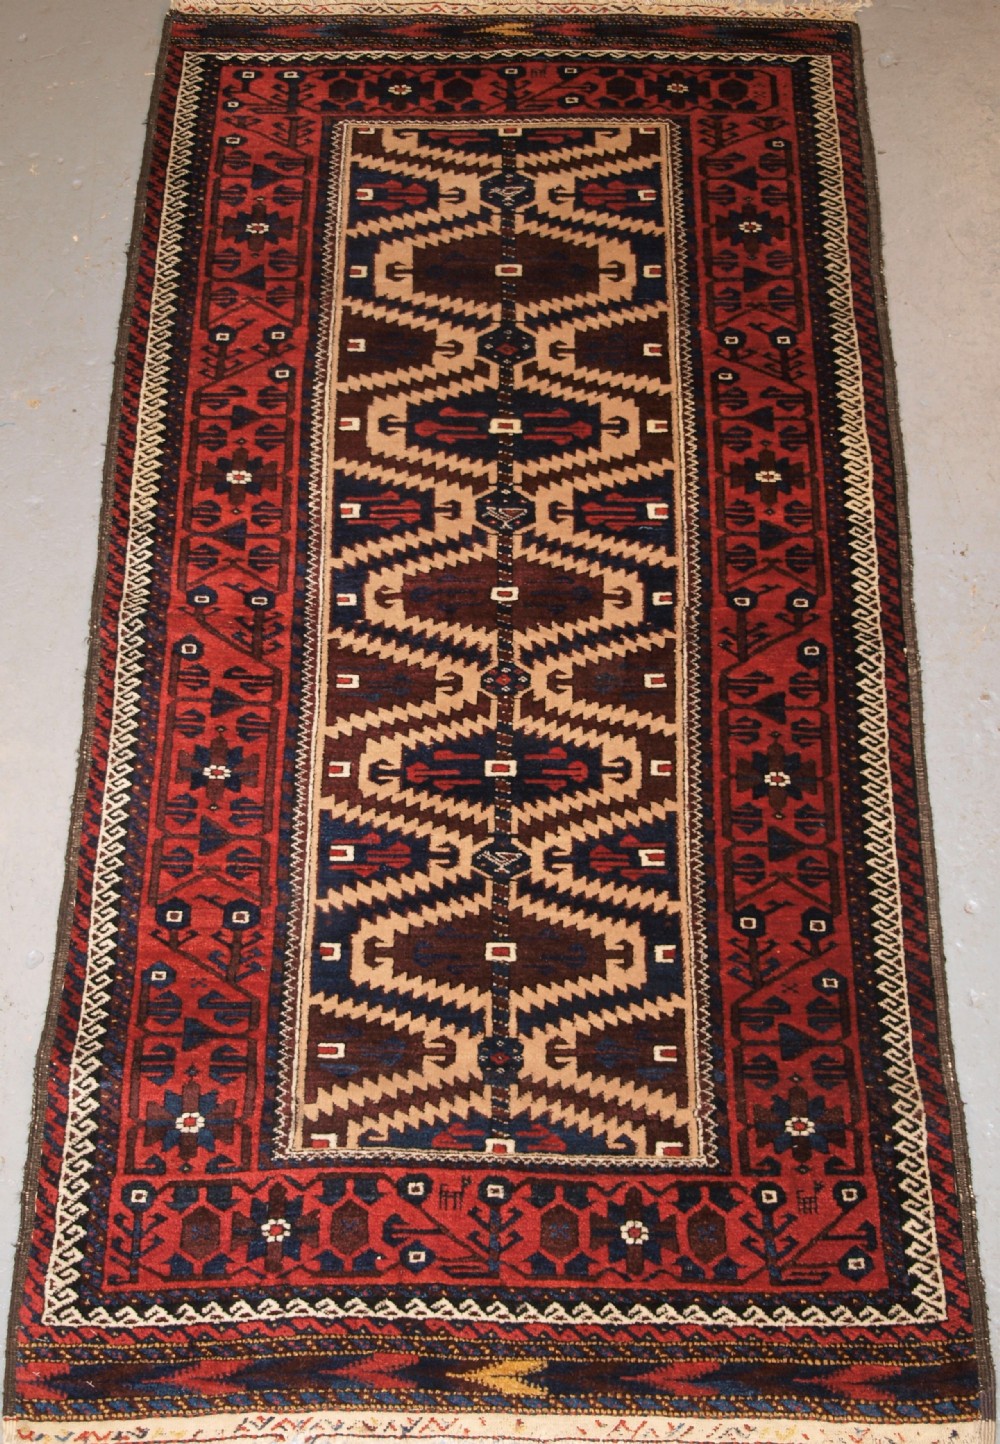 antique baluch rug khorassan region north east persia late 19th century